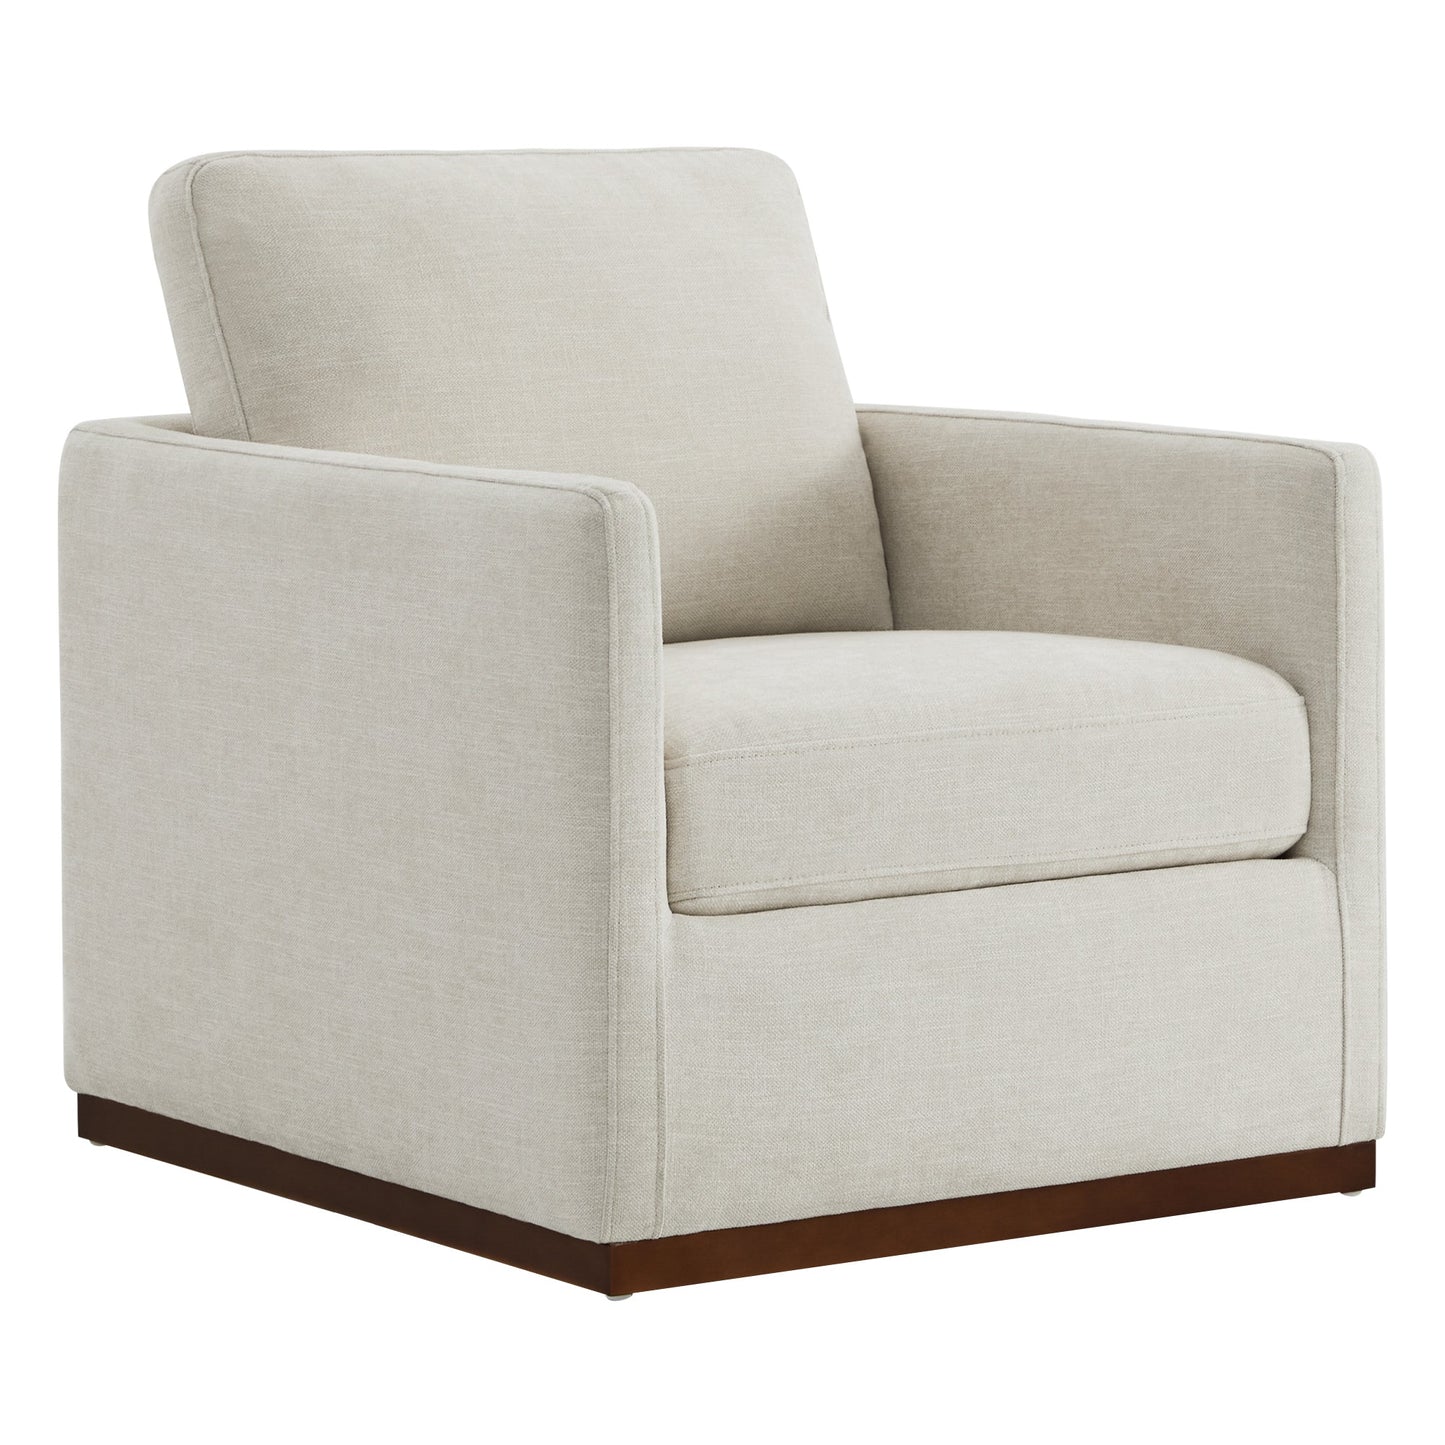 CHITA LIVING-Henry Swivel Accent Chair with Wood Base-Accent Chair-Fabric-Linen-